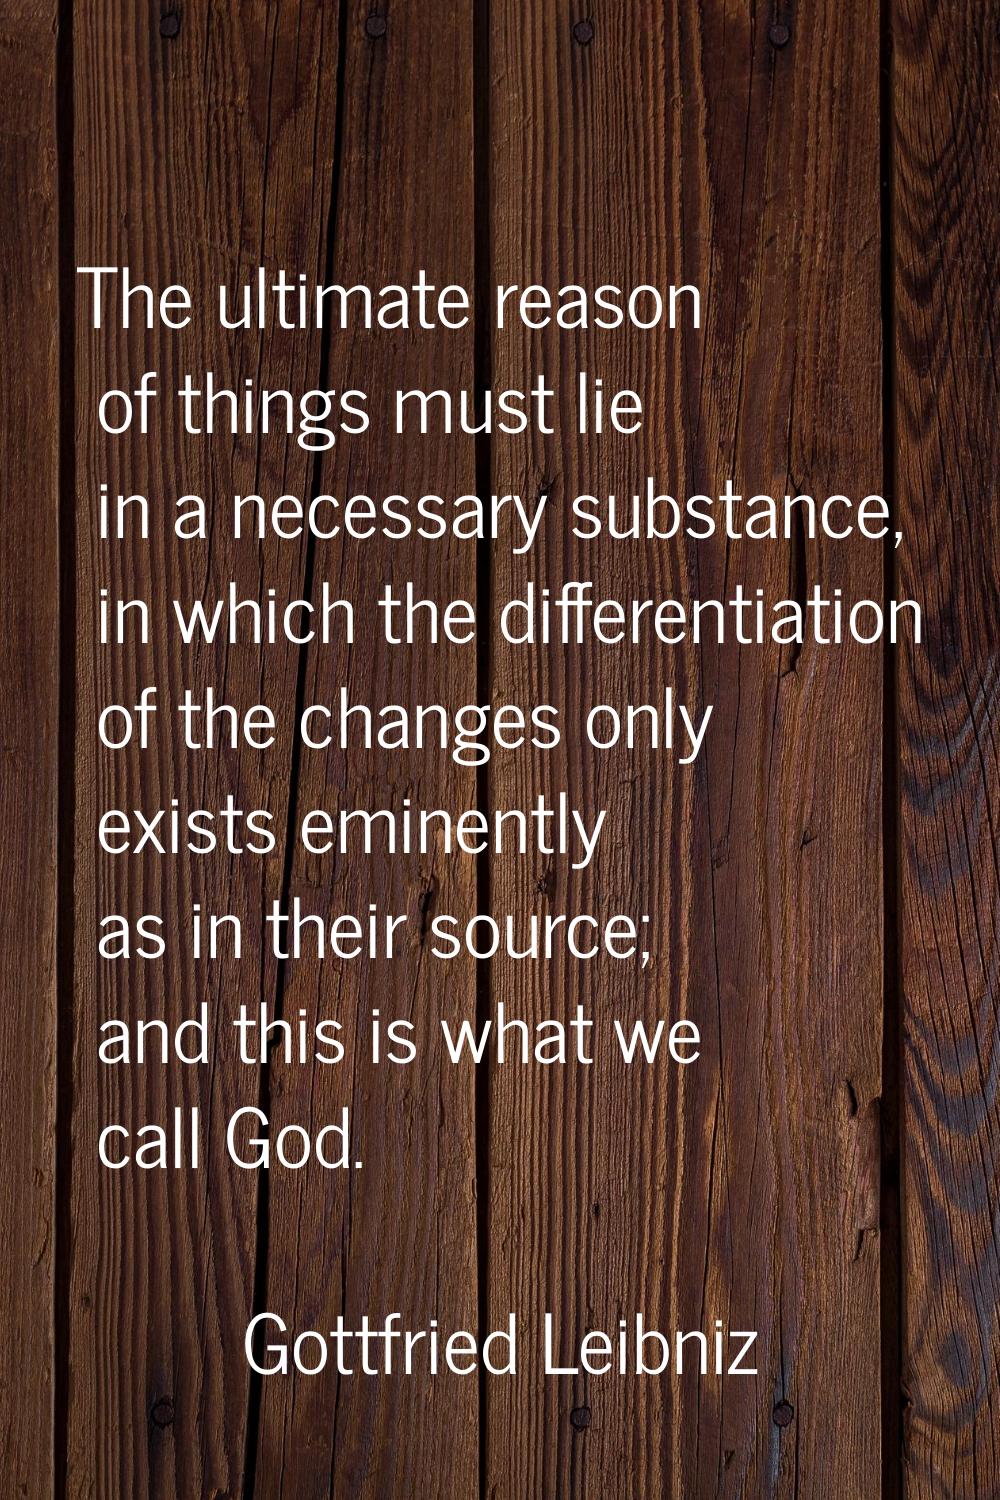 The ultimate reason of things must lie in a necessary substance, in which the differentiation of th